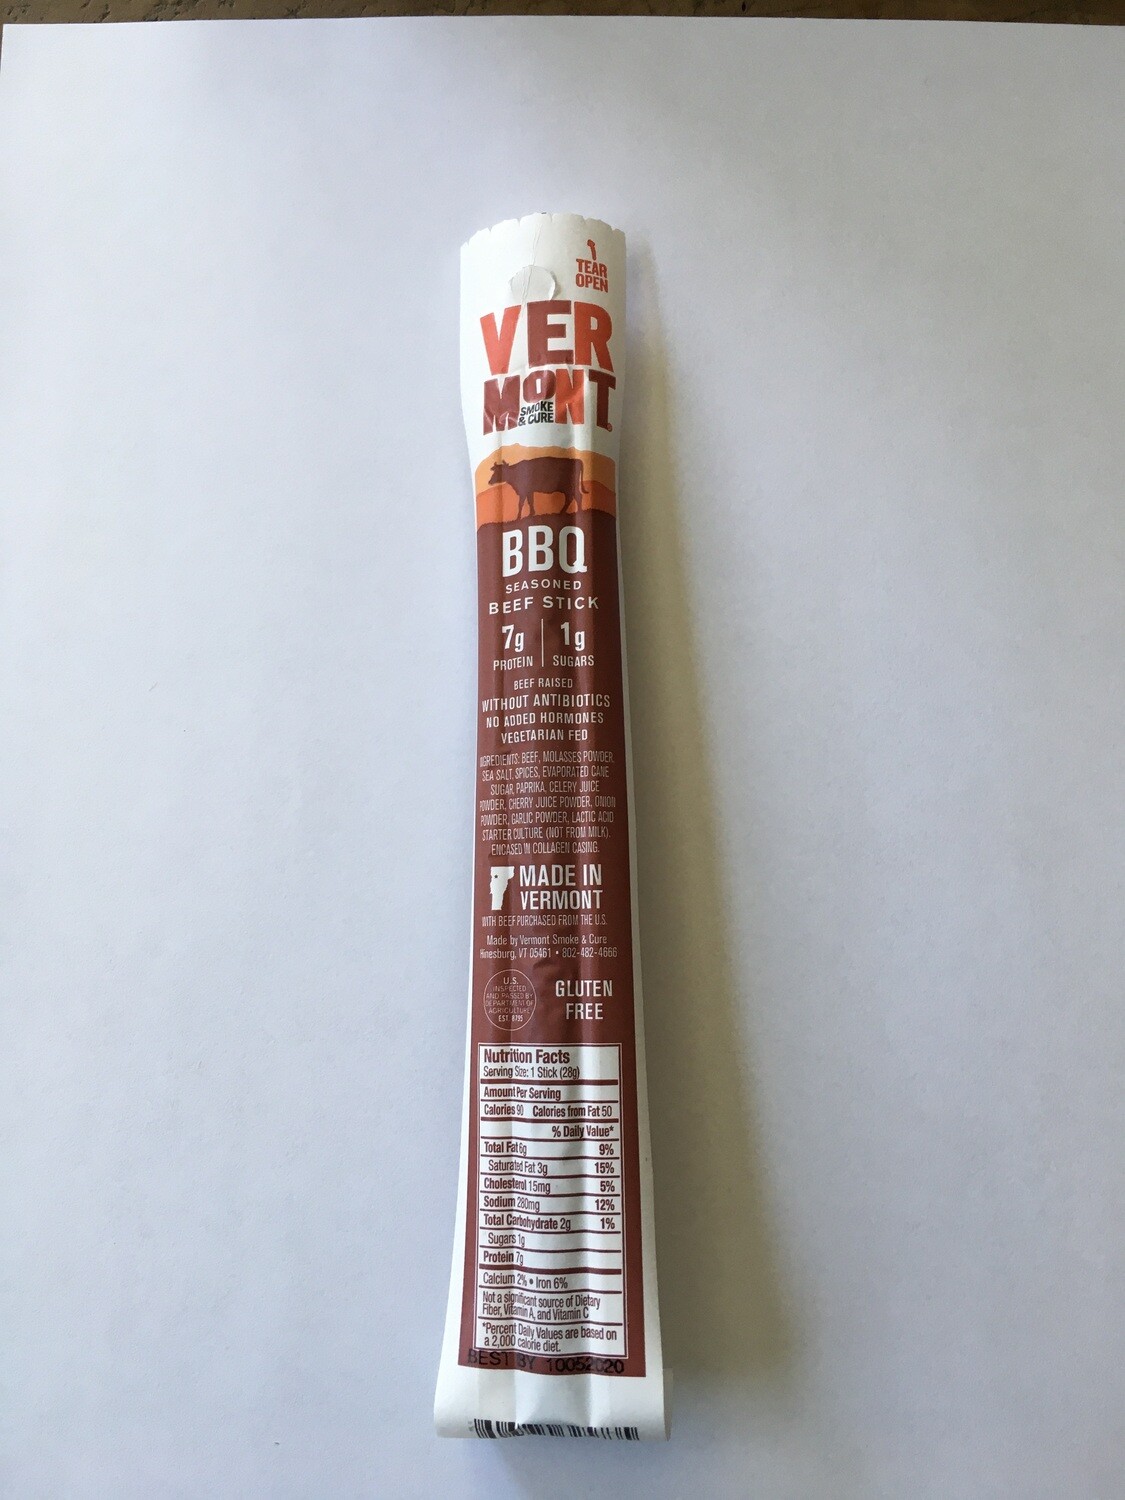 Grocery / Snack / Vermont Beef BBQ Stick